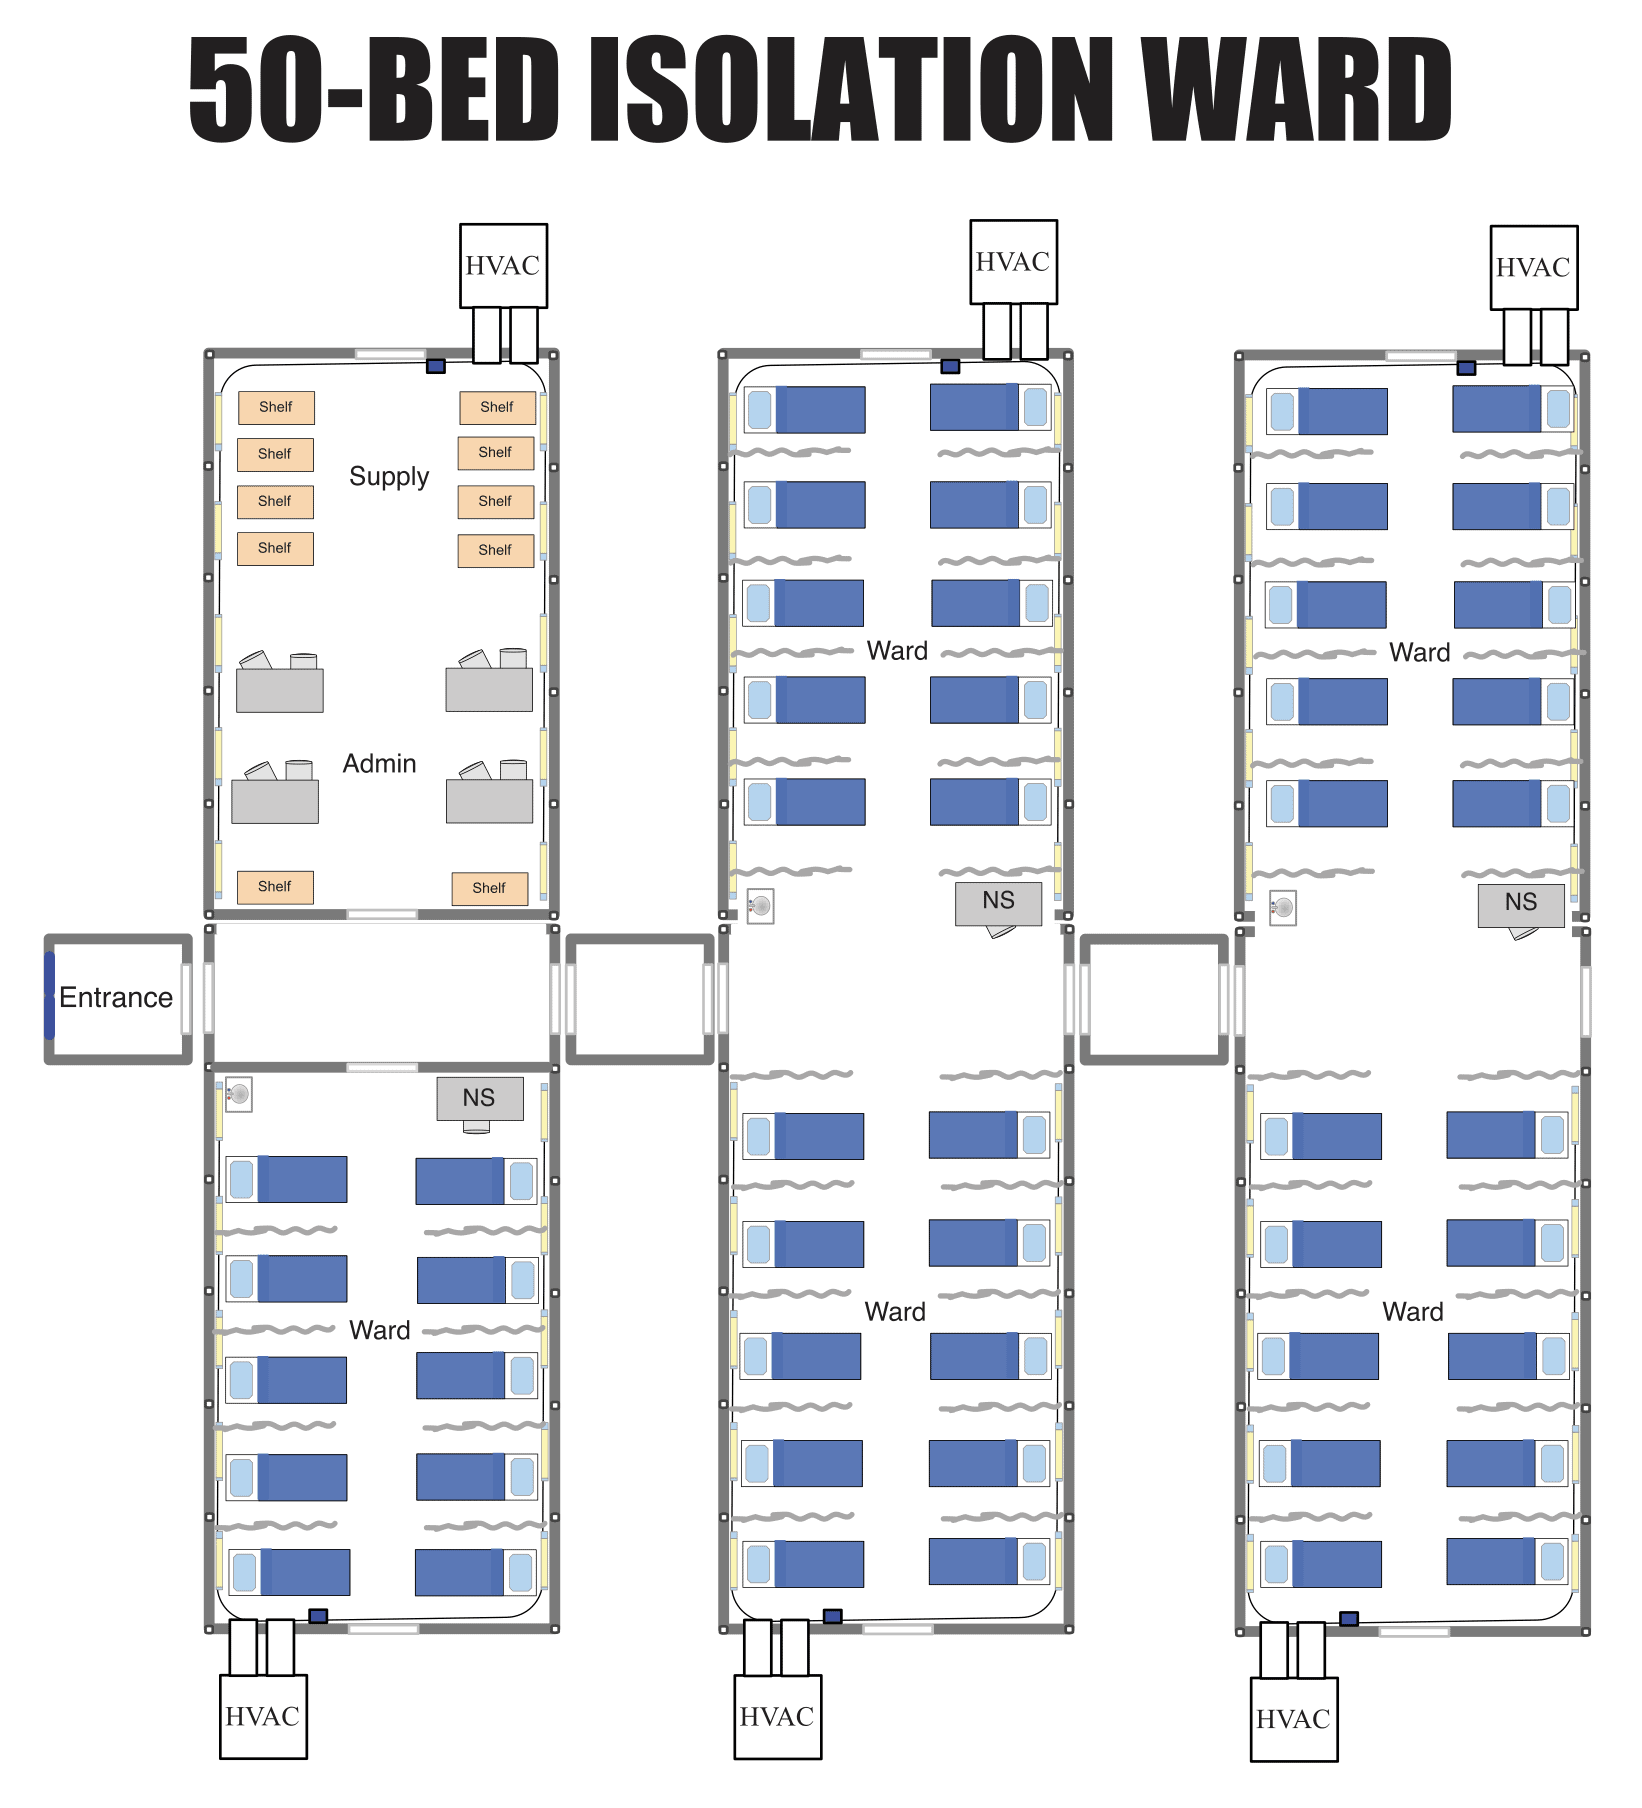 Layout of 50-bed isolation ward